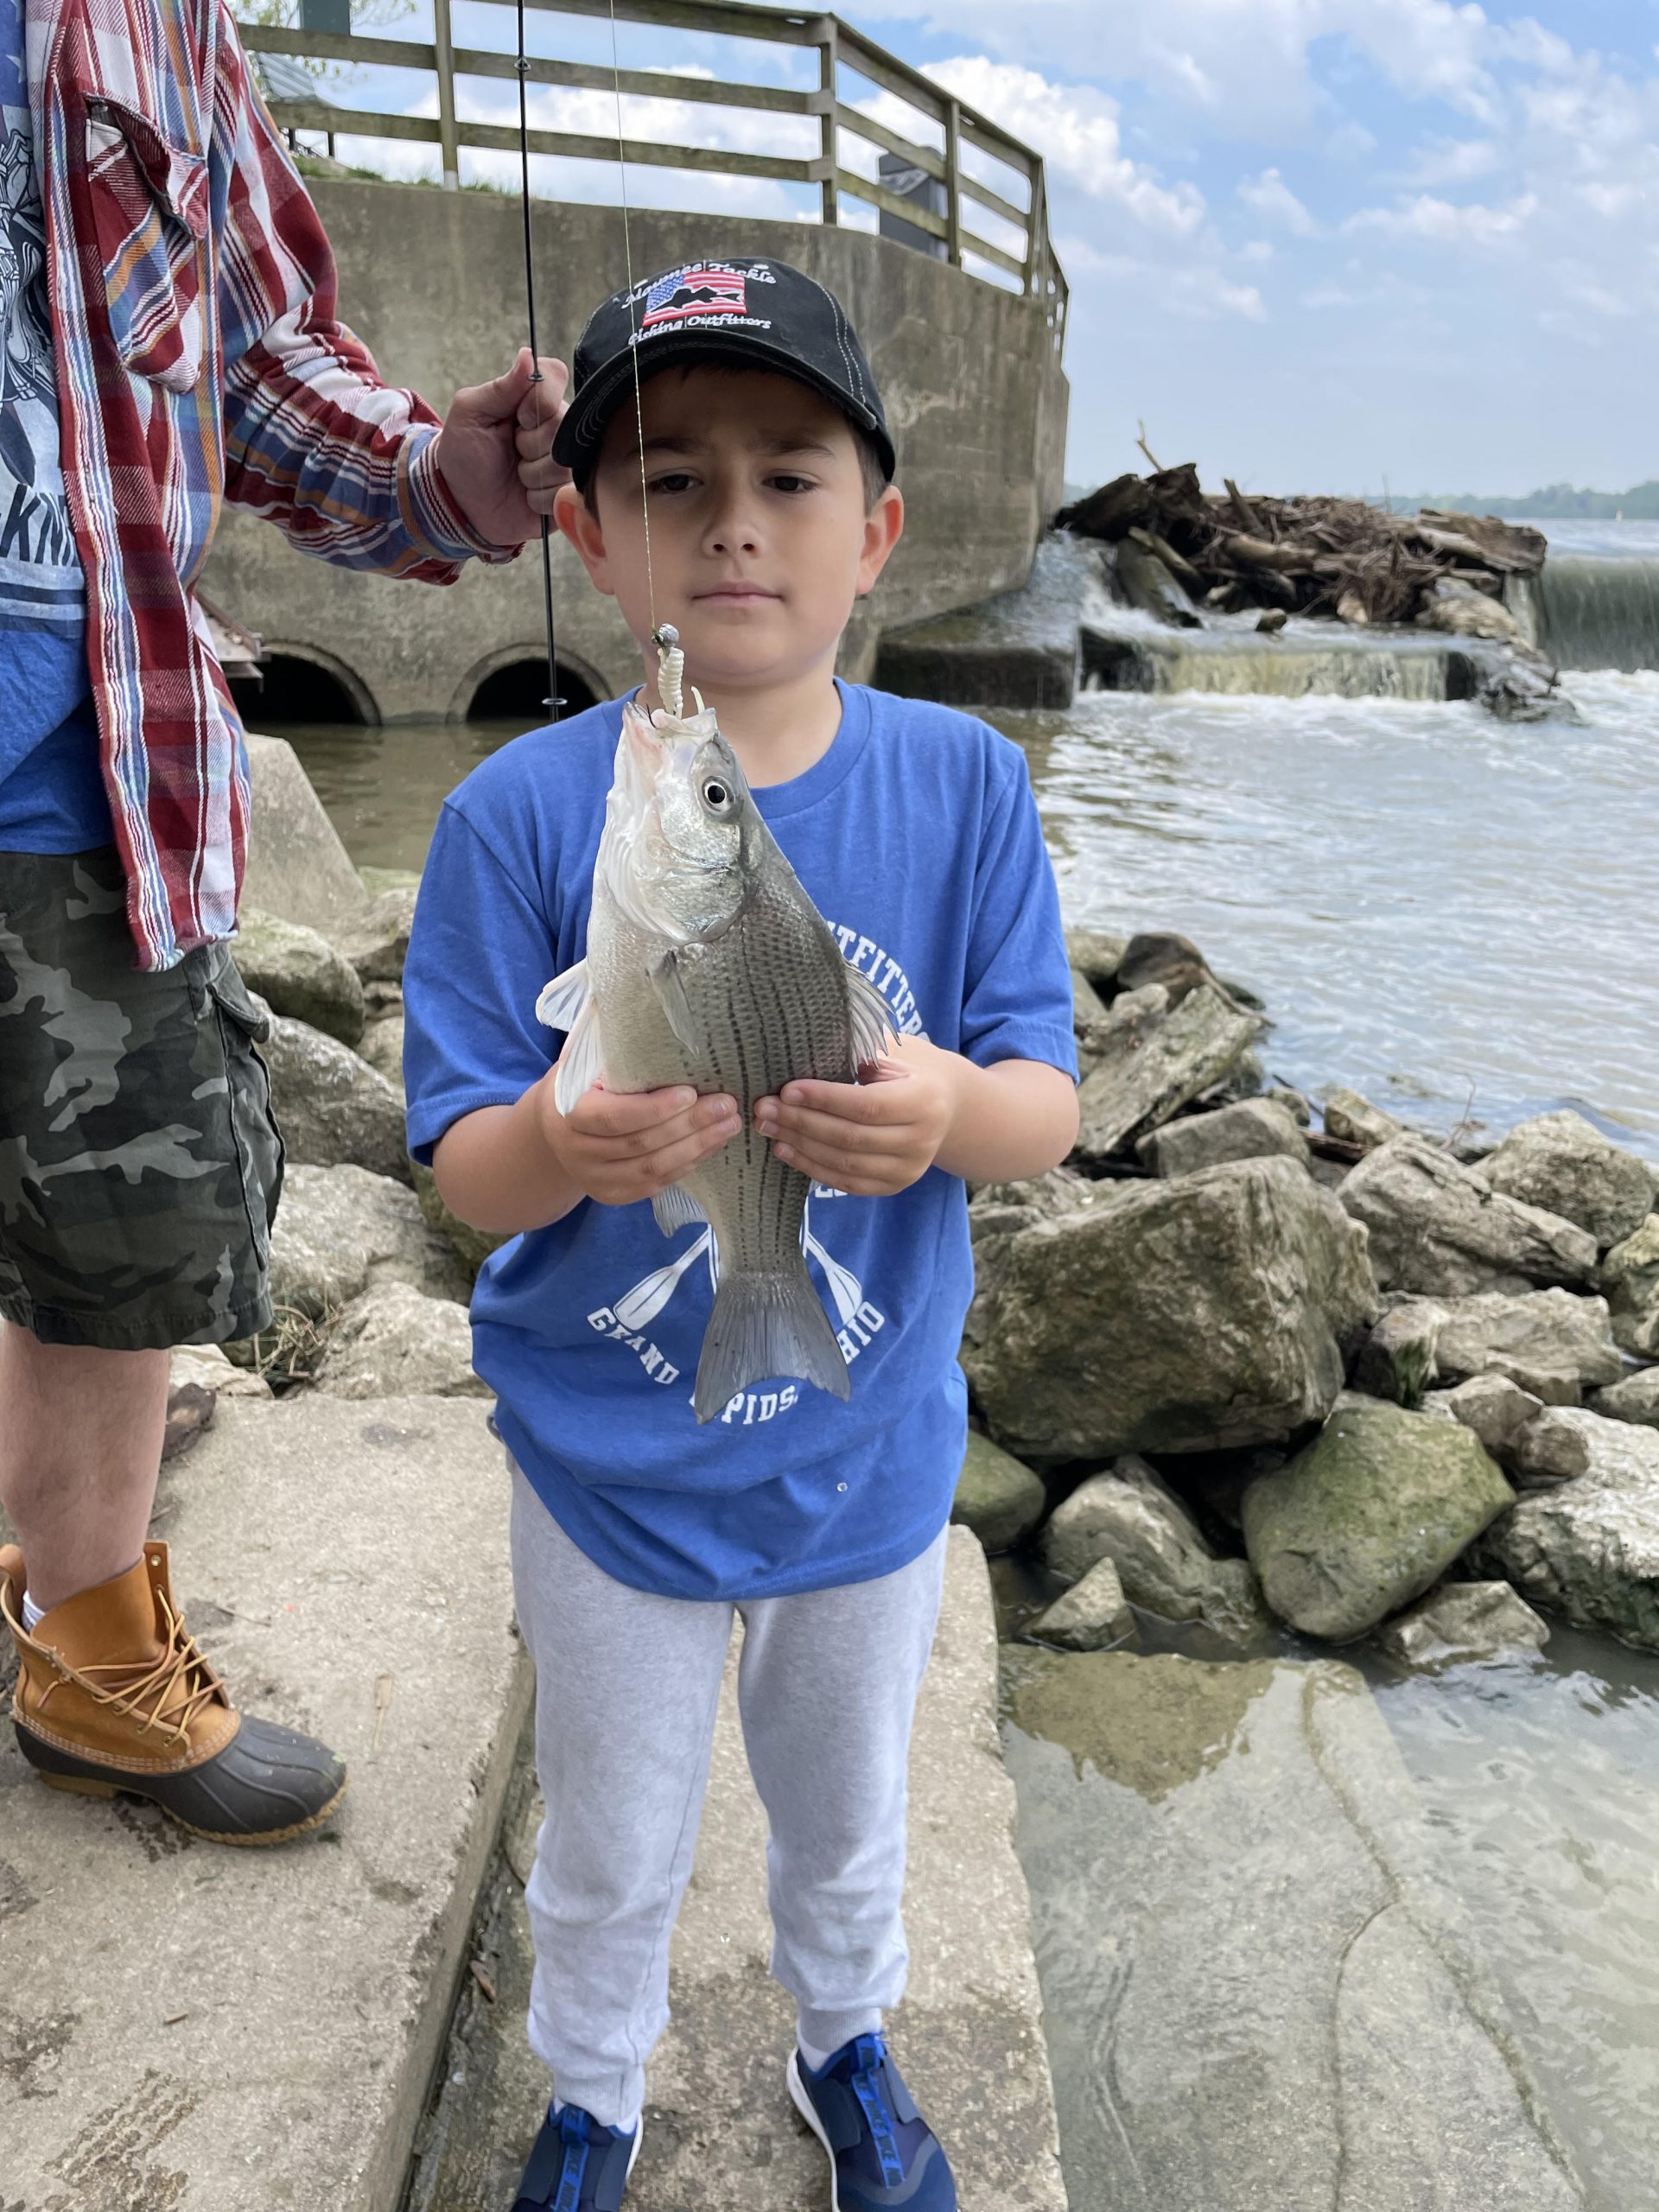 Maumee river report- 19 may 22